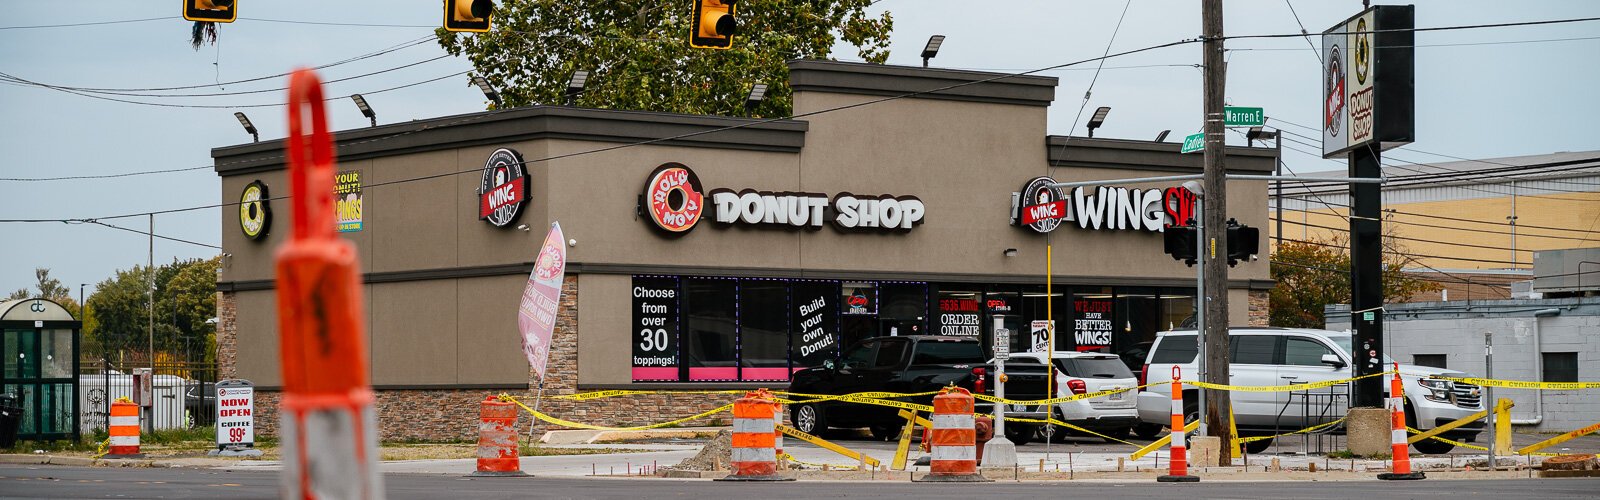 Holy Moly Donut Shop is one of many businesses on E. Warren impacted by construction.